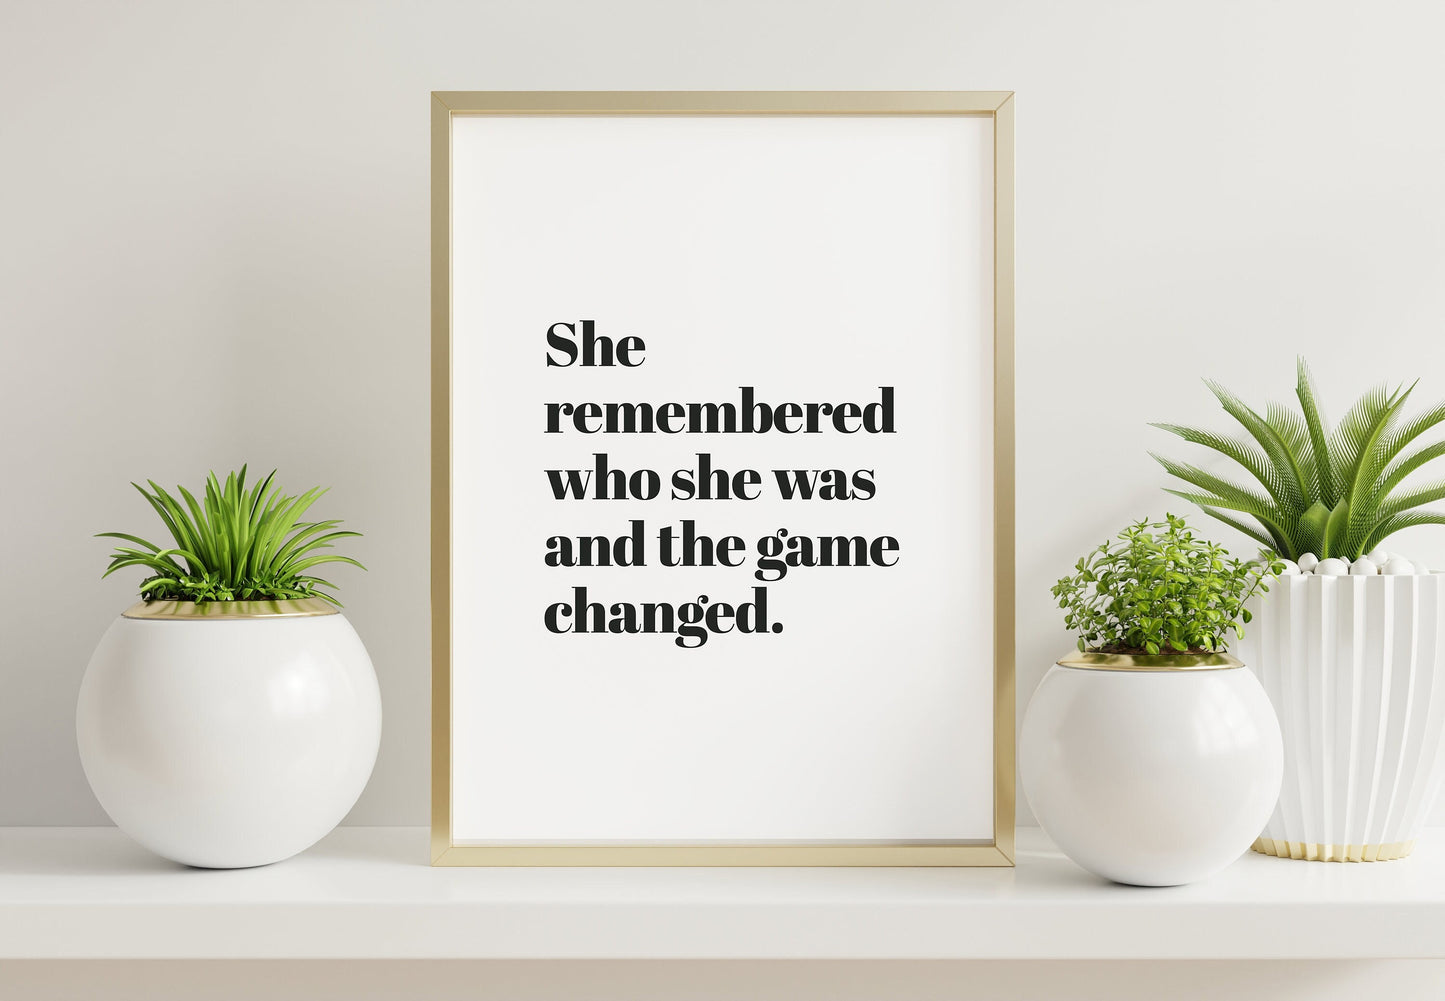 She remembered who she was and the game changed, Poster mit Spruch, Motivation Poster, Inspirierendes Zitat Poster, Büro Poster, Girl Power